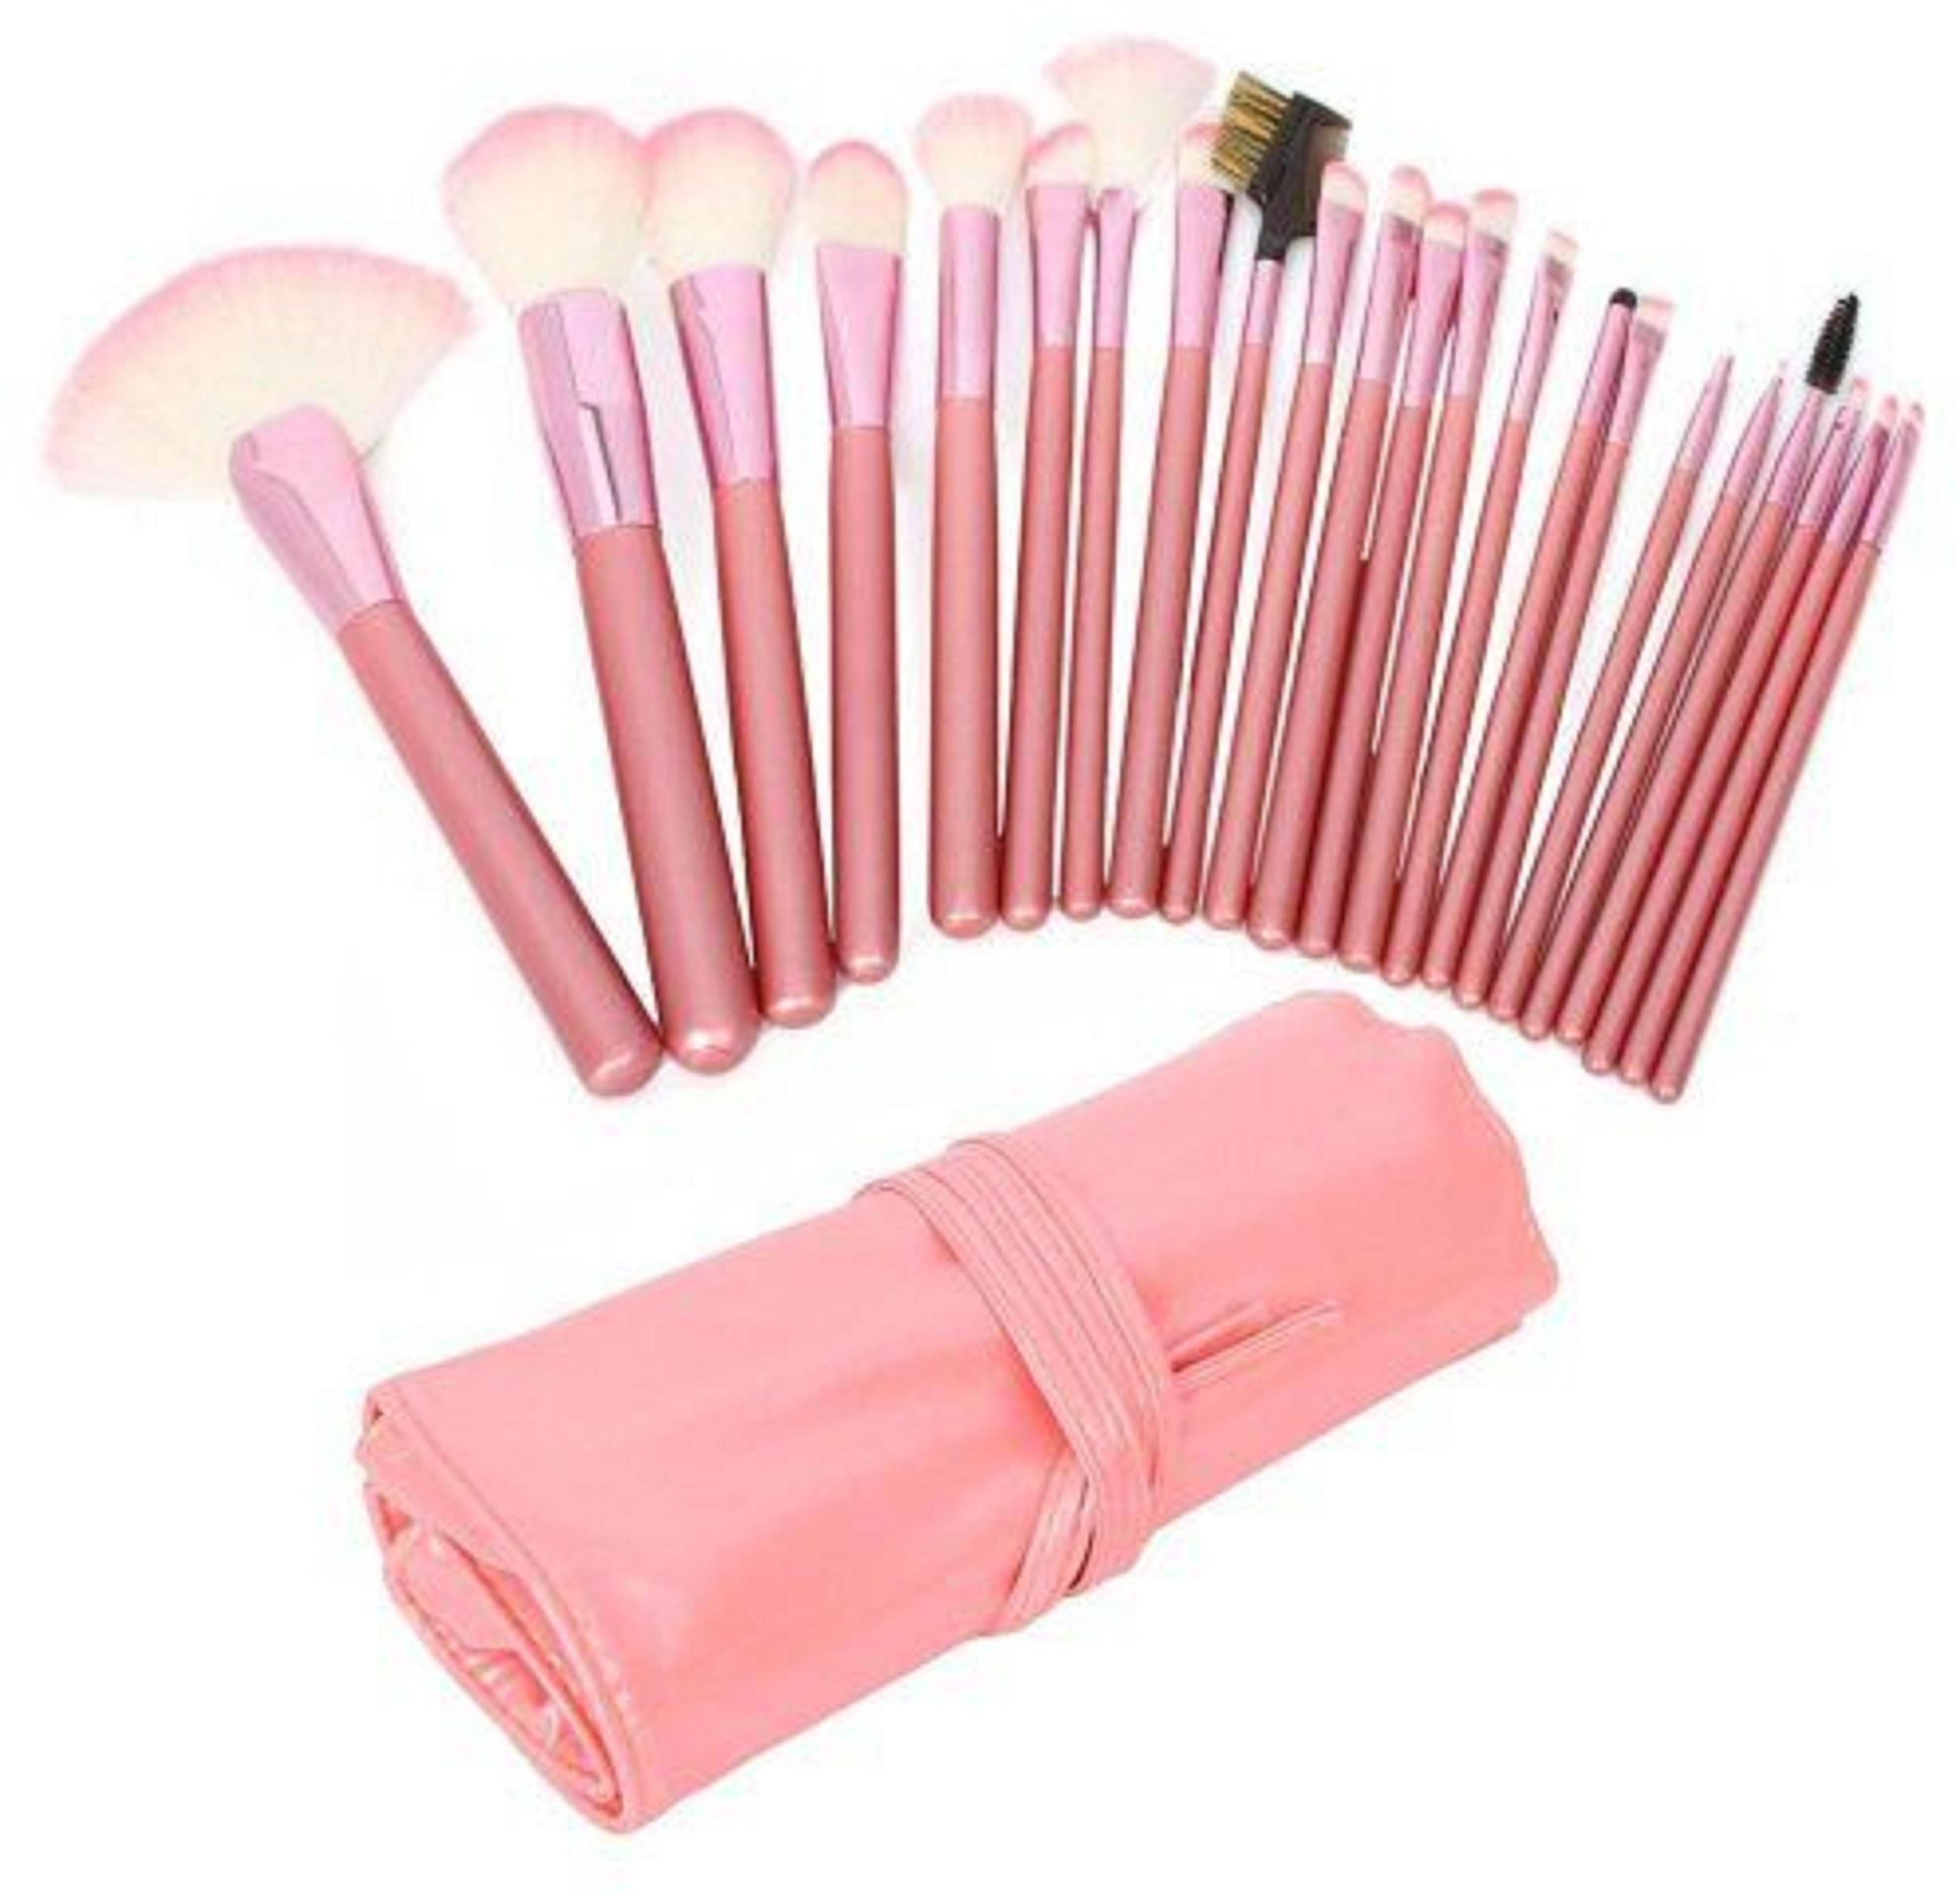 Tomtop 32-piece Makeup Brush Set With Pink Pouch Bag